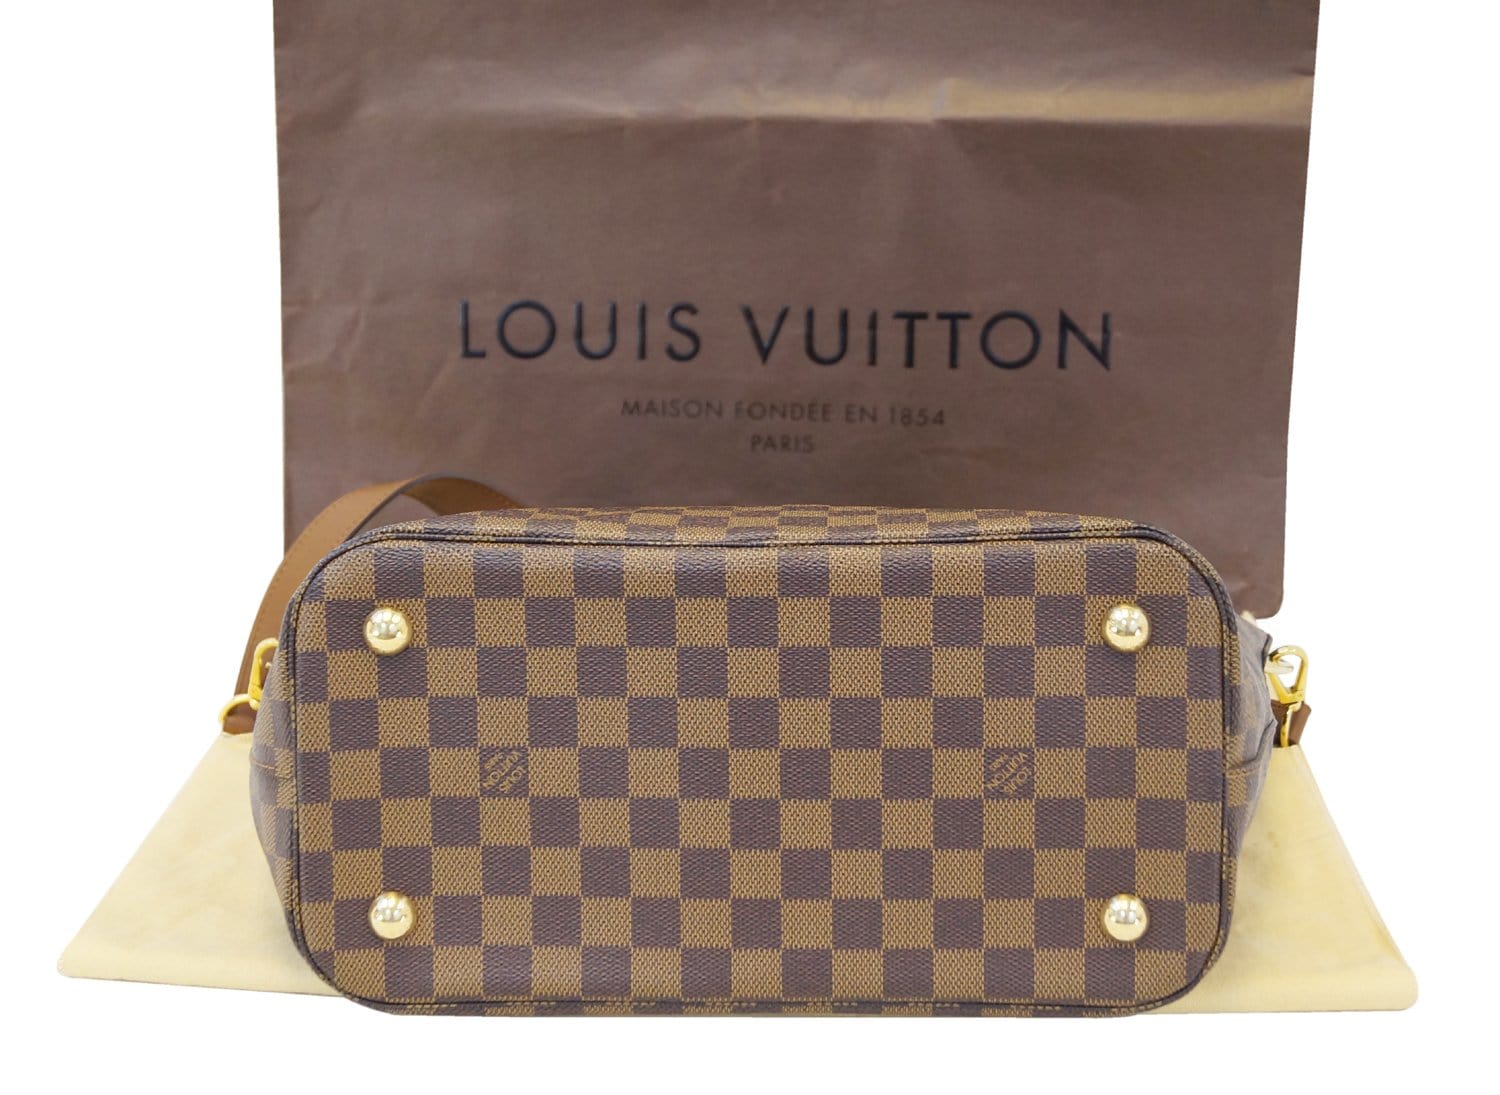 Louis Vuitton Belmont review + what's in my bag! 